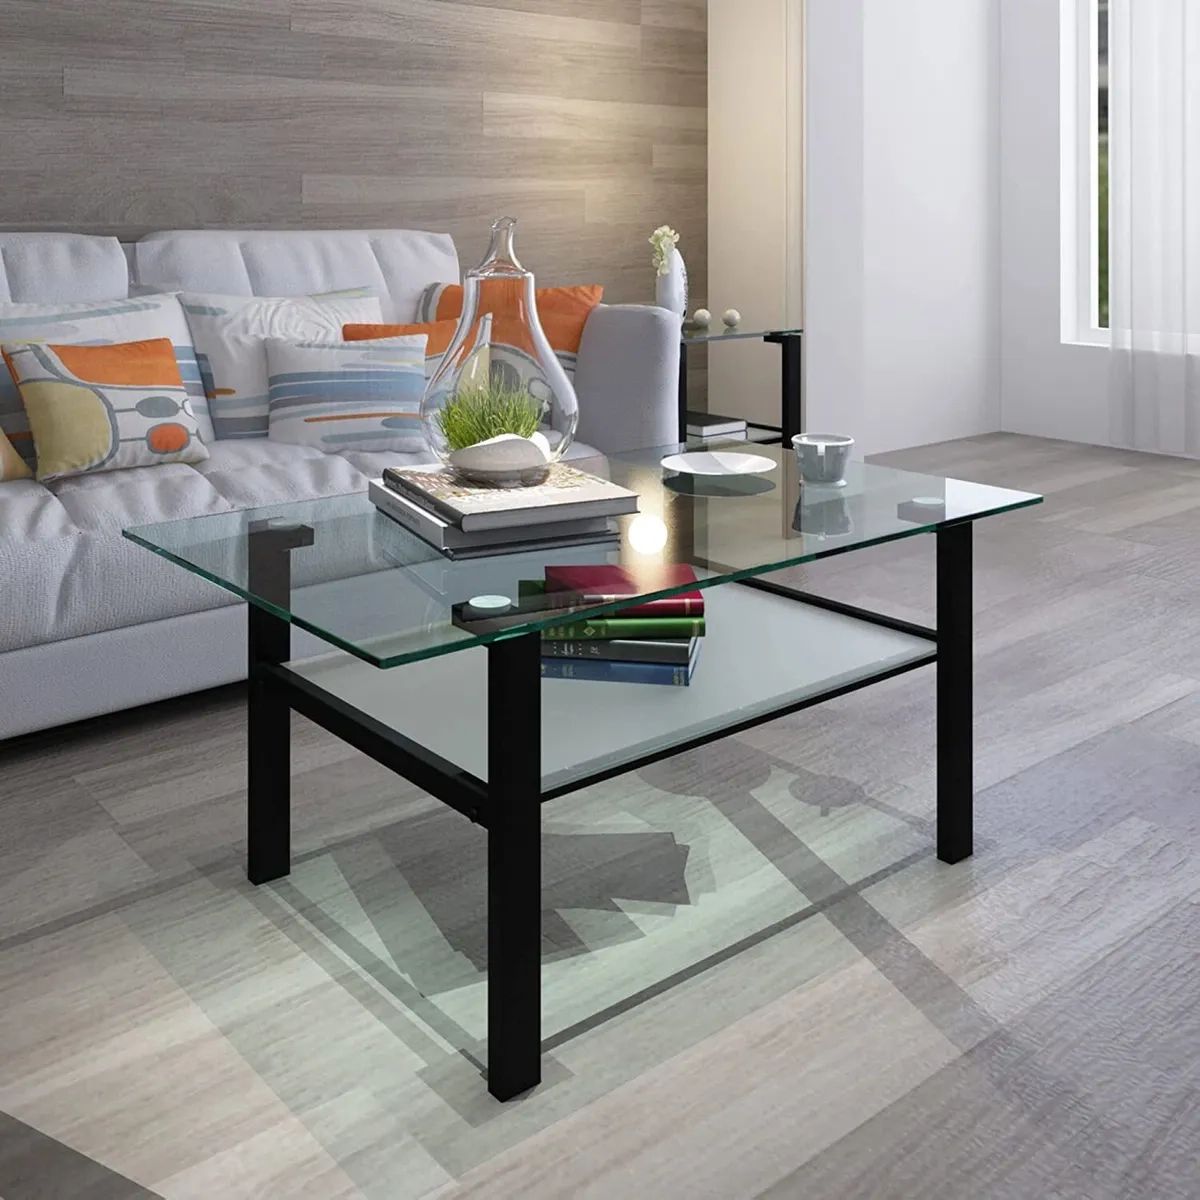 Tempered Glass Coffee Table With Metal Legs Modern Small Coffee Table For  Living | Ebay For Coffee Tables With Metal Legs (Photo 9 of 15)